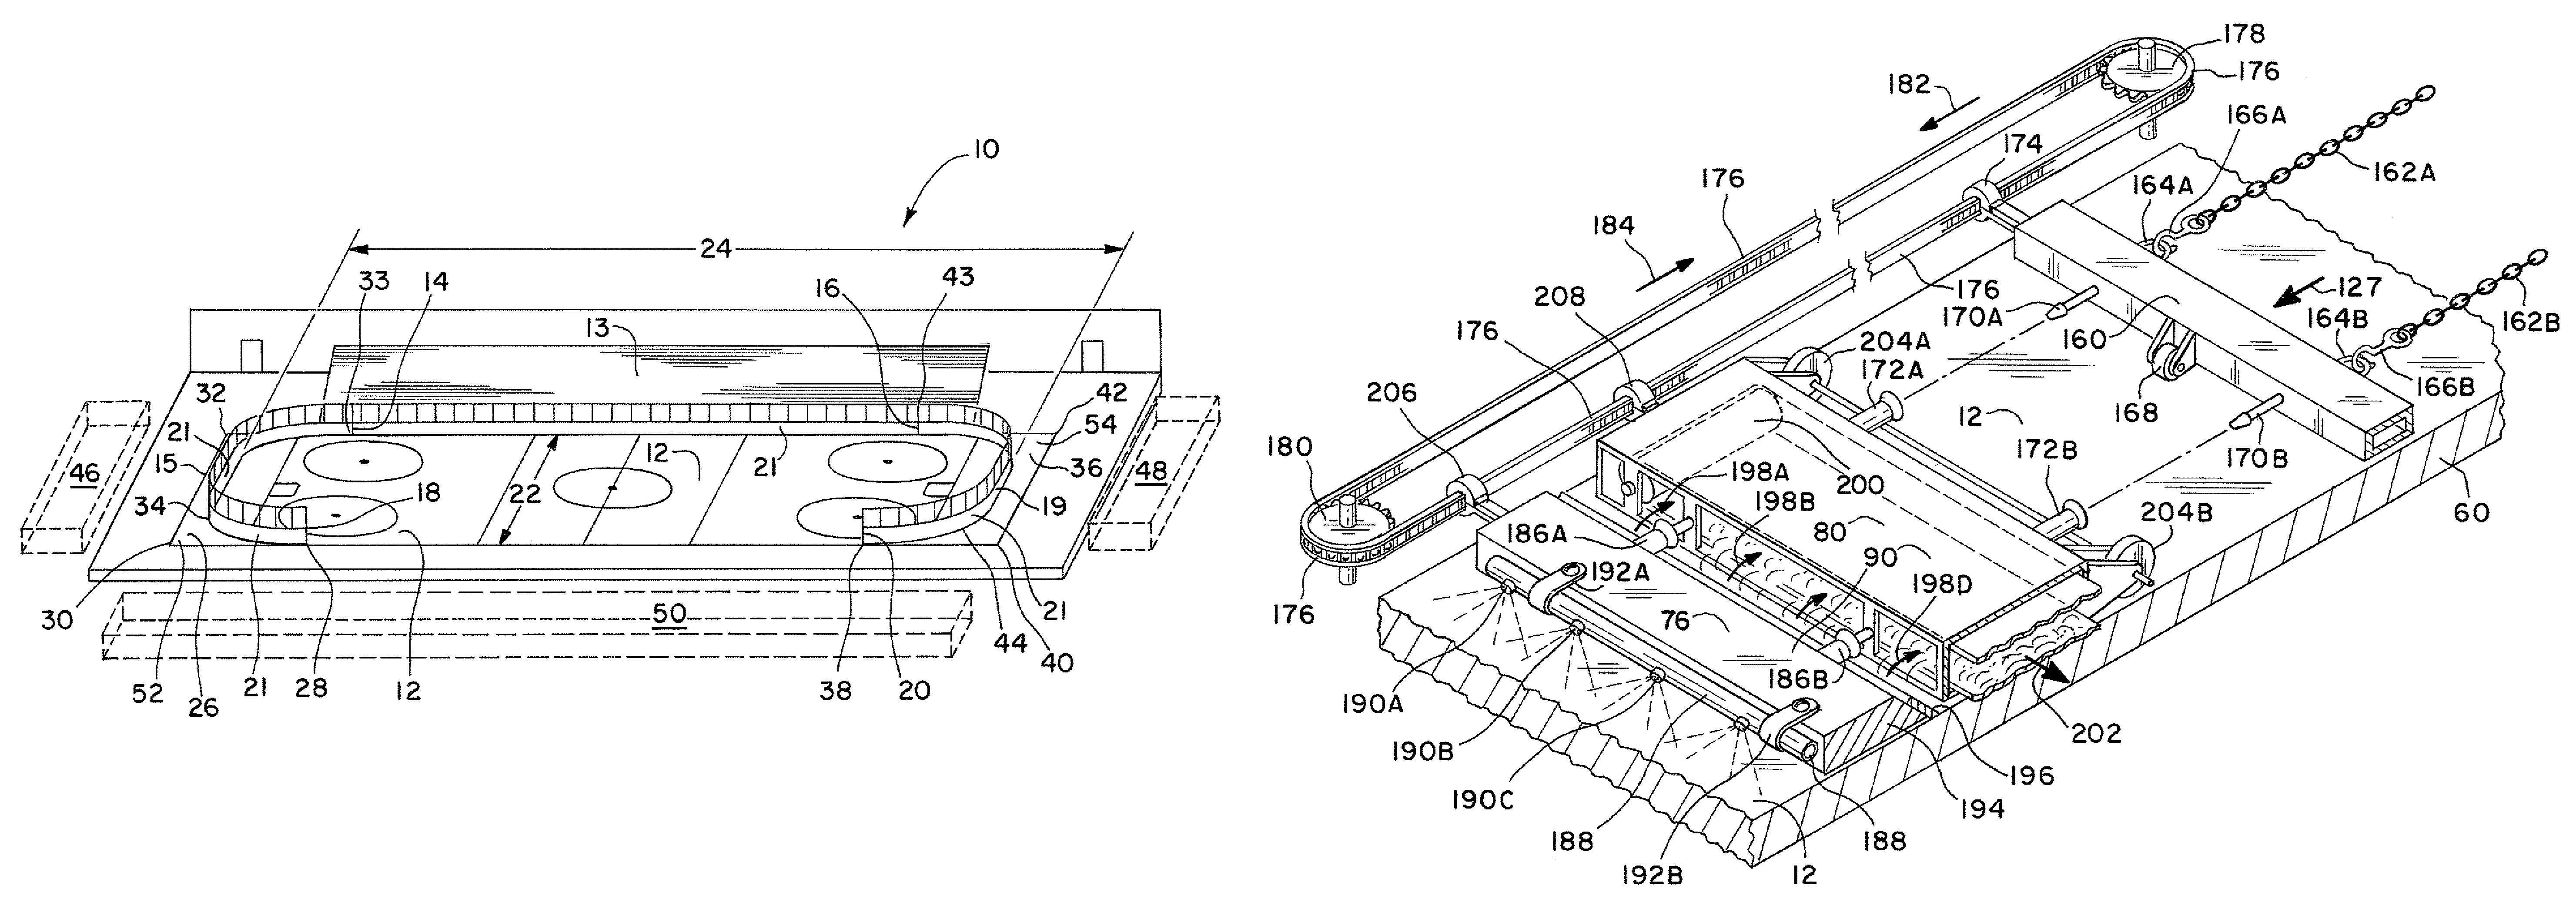 Apparatus and methods for refurbishing ice surfaces